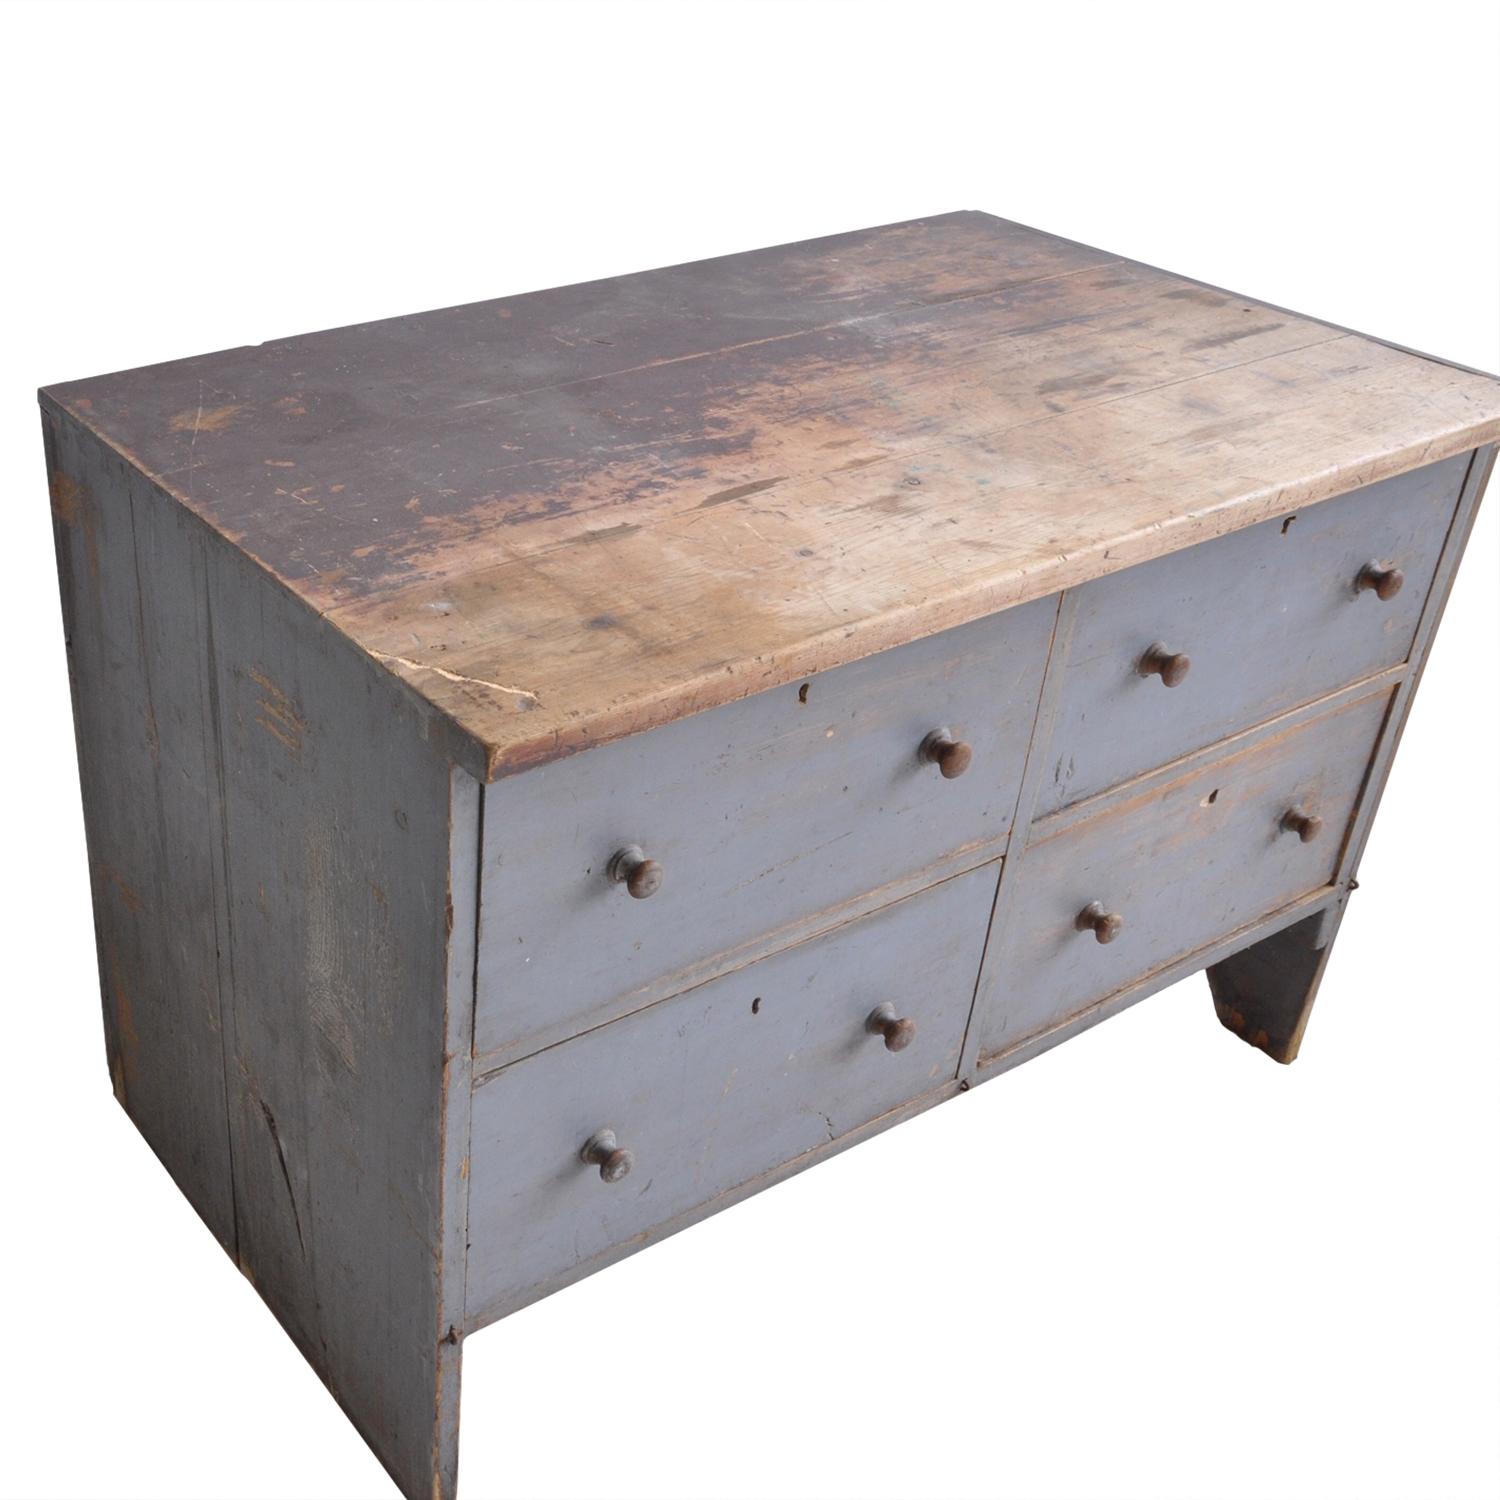 A 19th century Swedish century original shop counter with four large deep drawers. This piece is a useful storage piece that would grace many rooms.
  